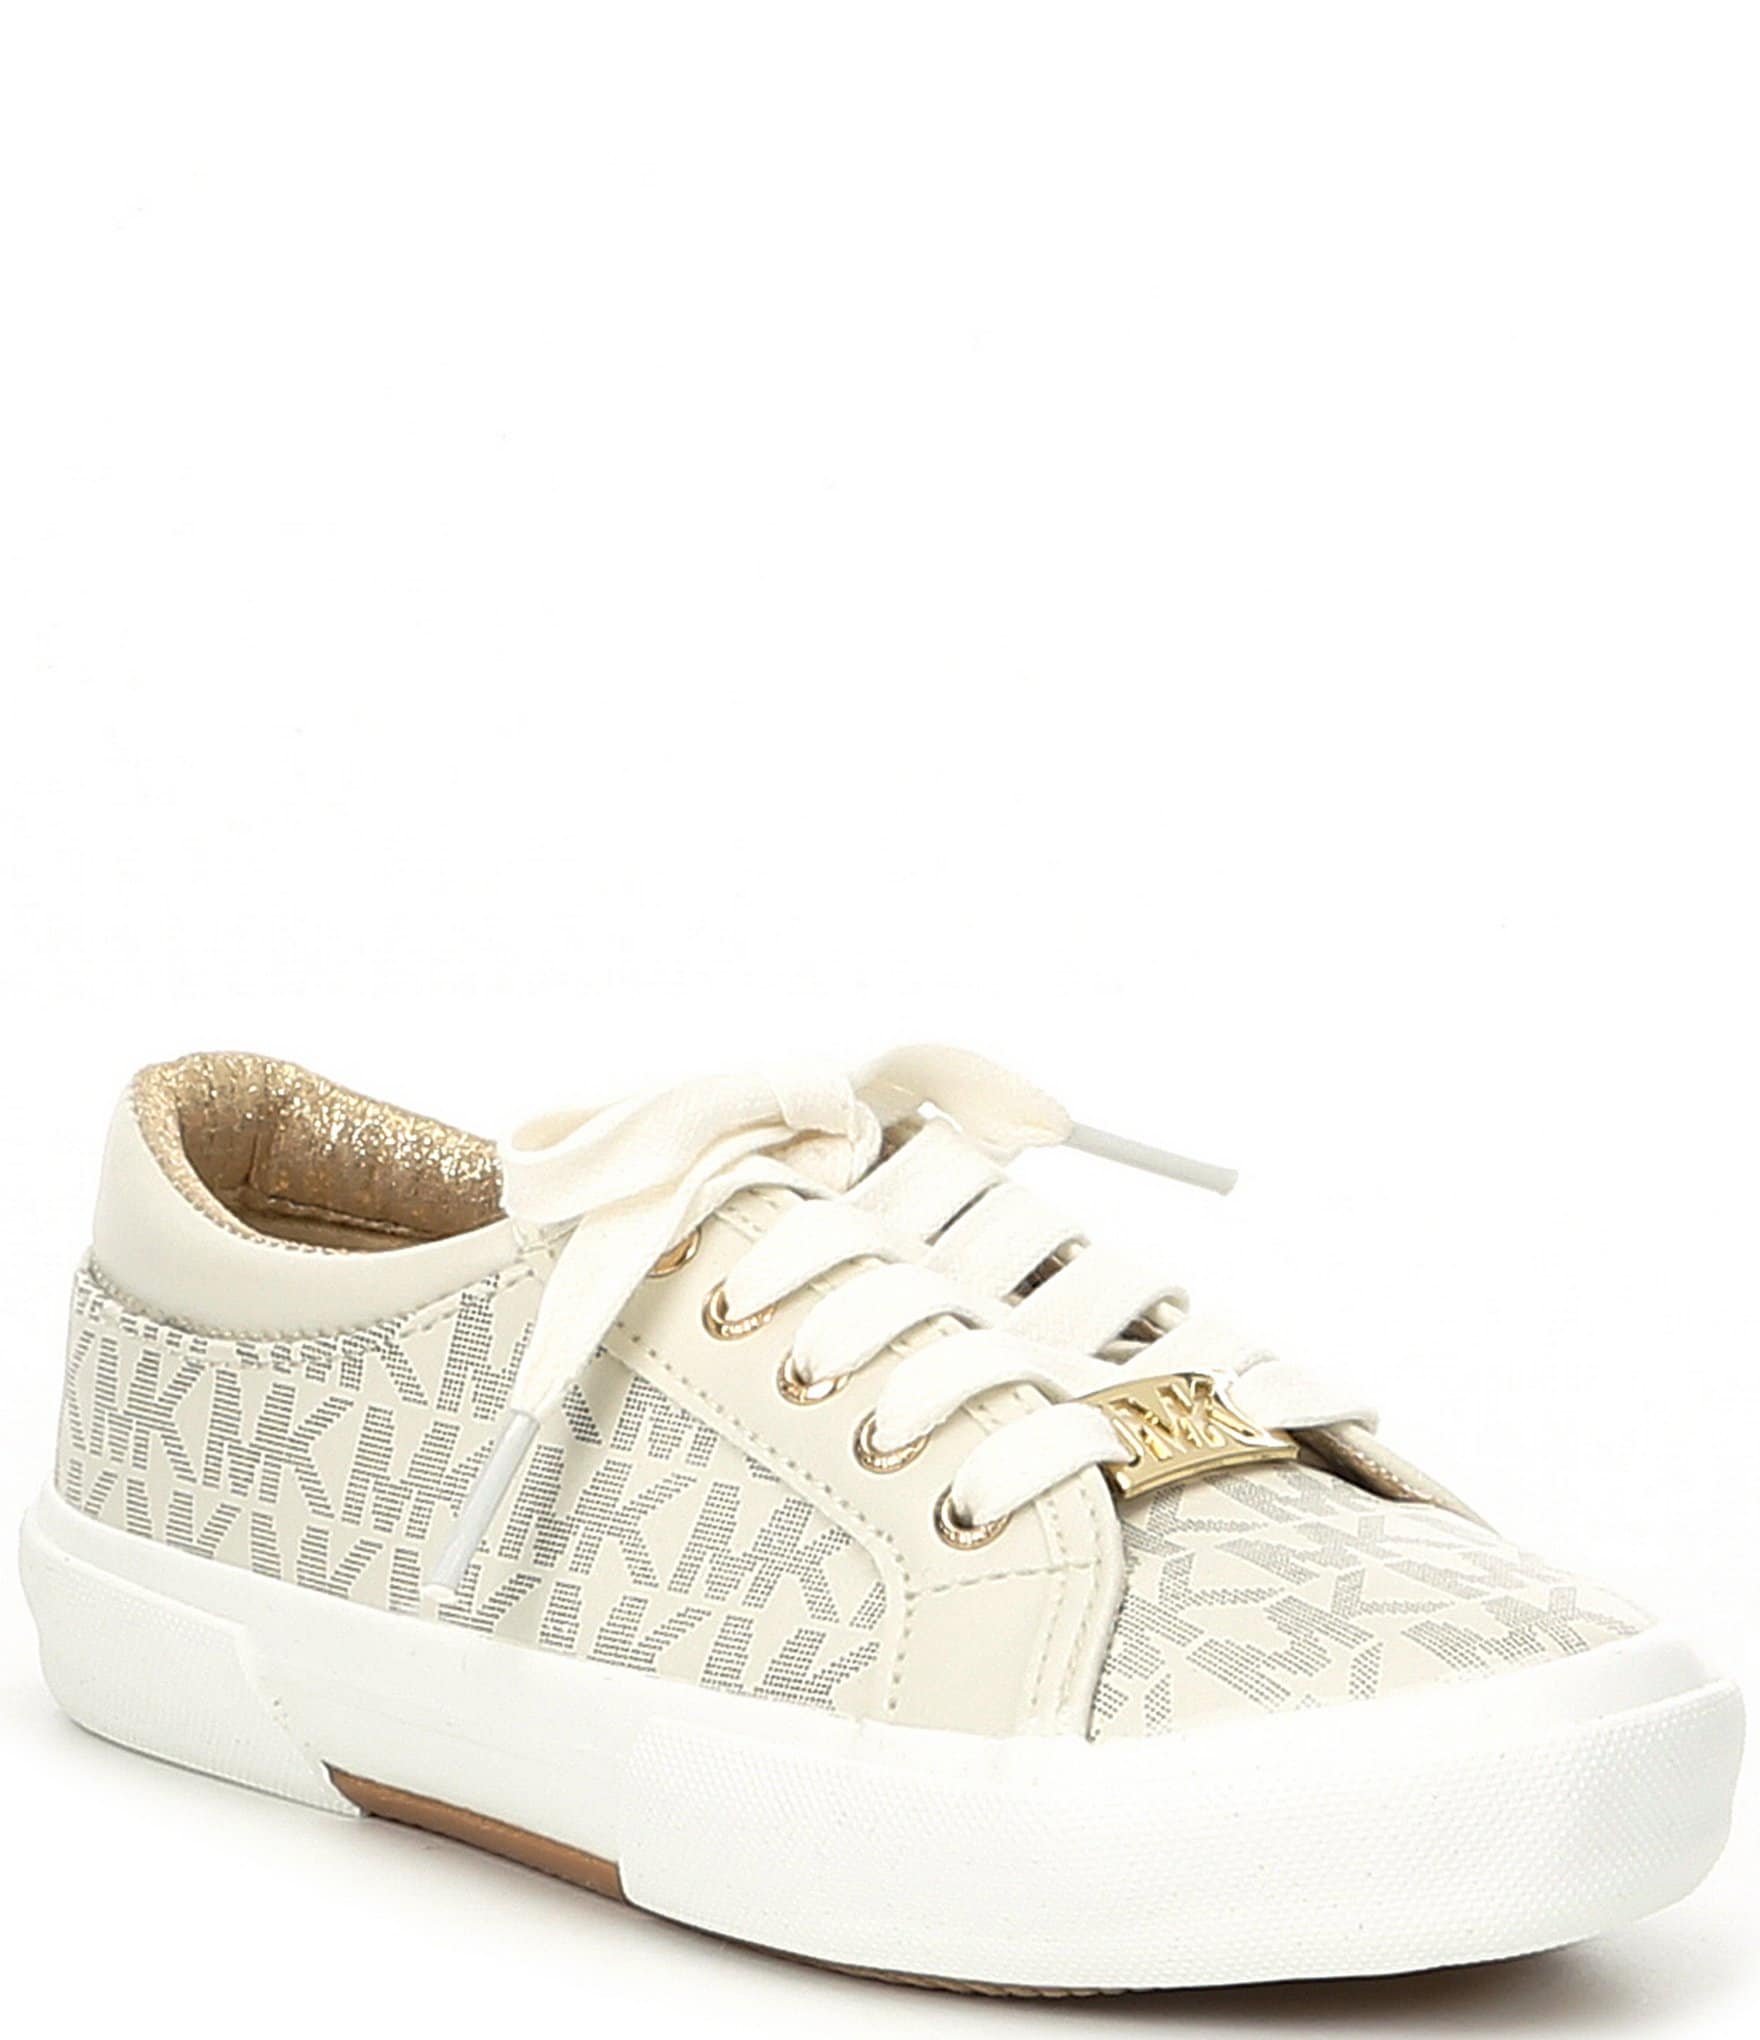 michael kors sneakers outlet